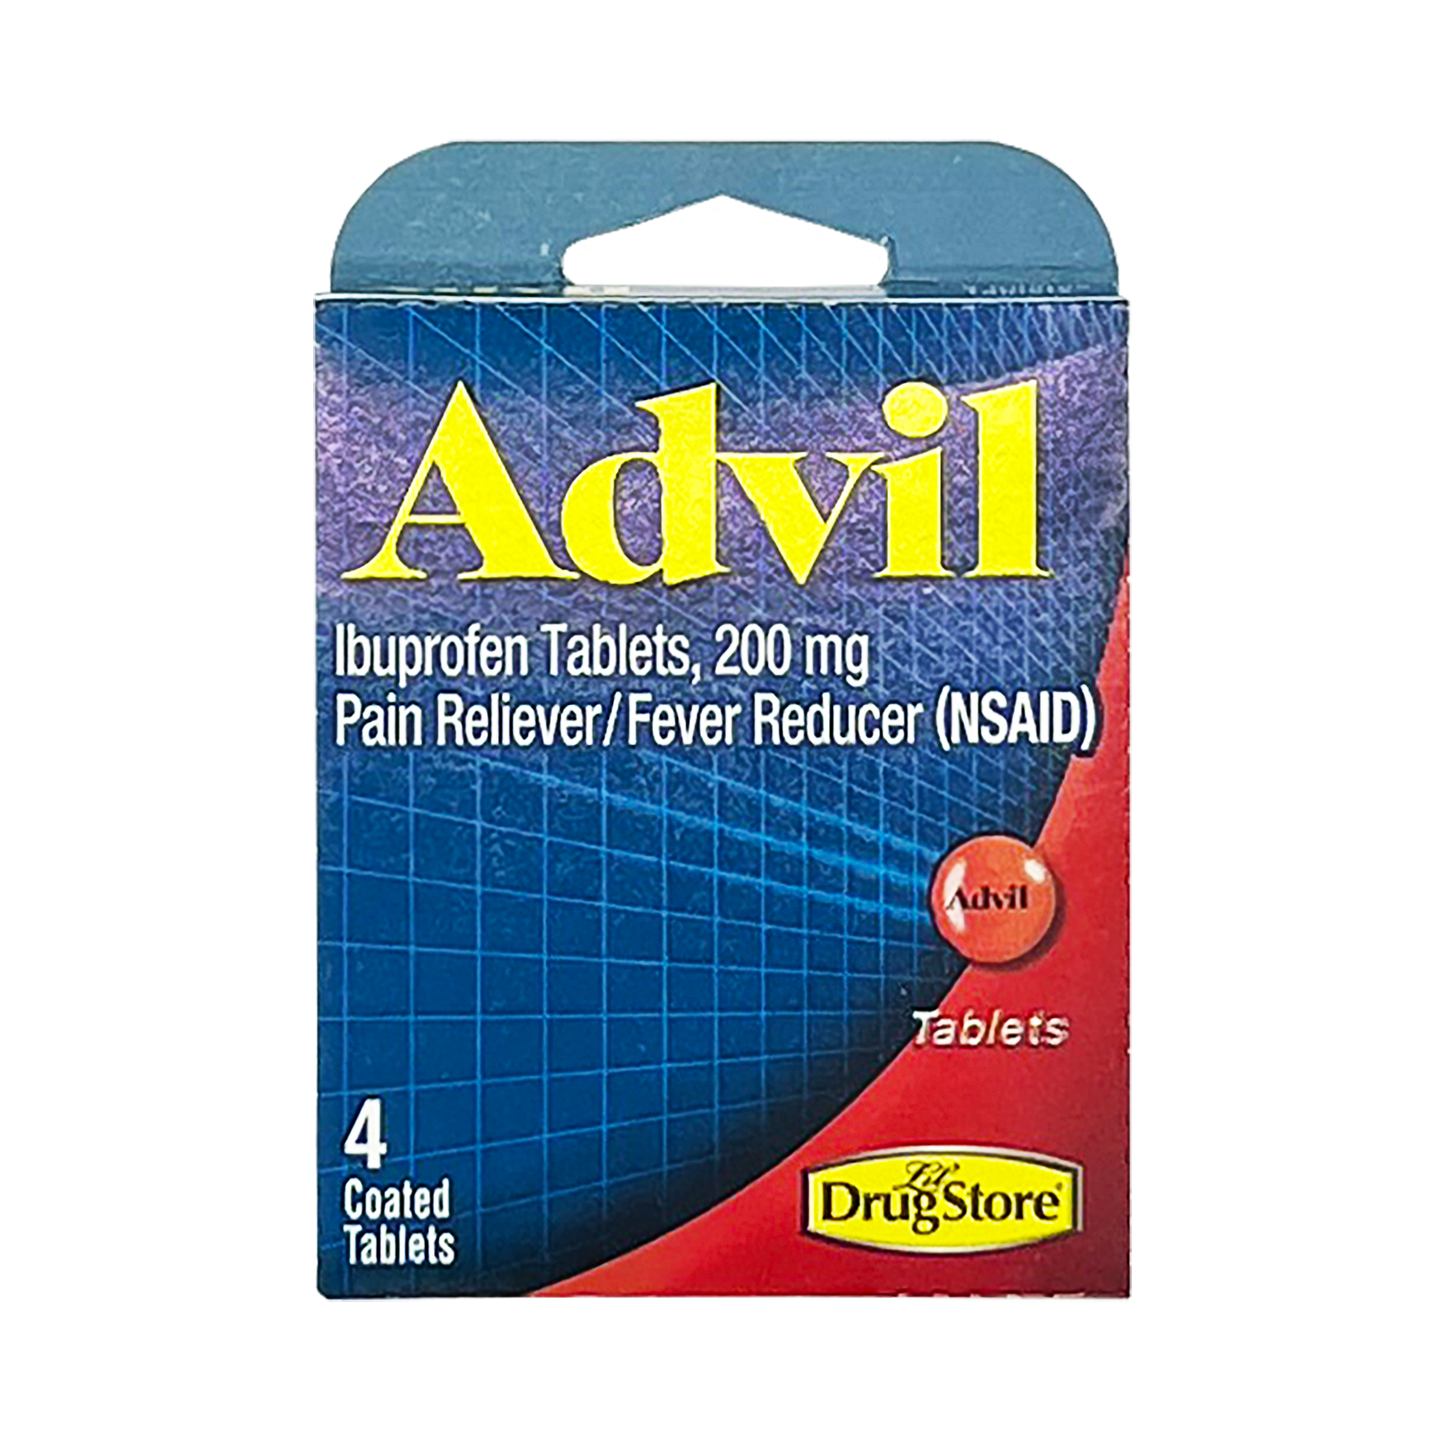 CARDED ADVIL